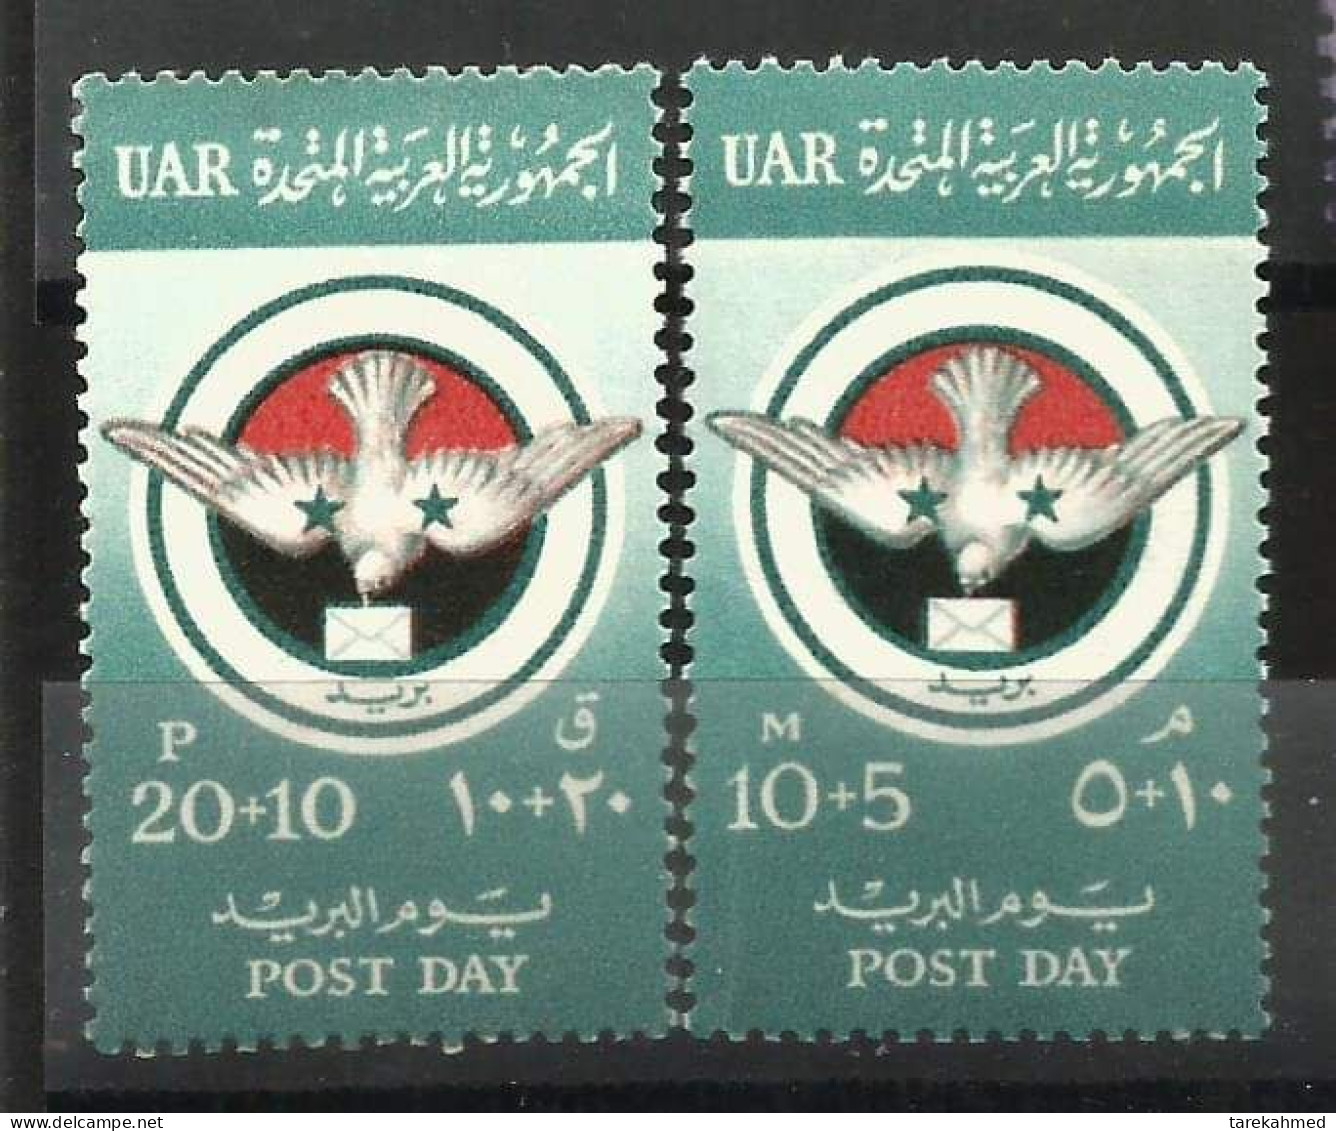 EGYPT (U.A.R) 1959 - Sc B18, Post Day, Both The Egyptian And The Syrian Issues, MNH, Original Gum - Ungebraucht